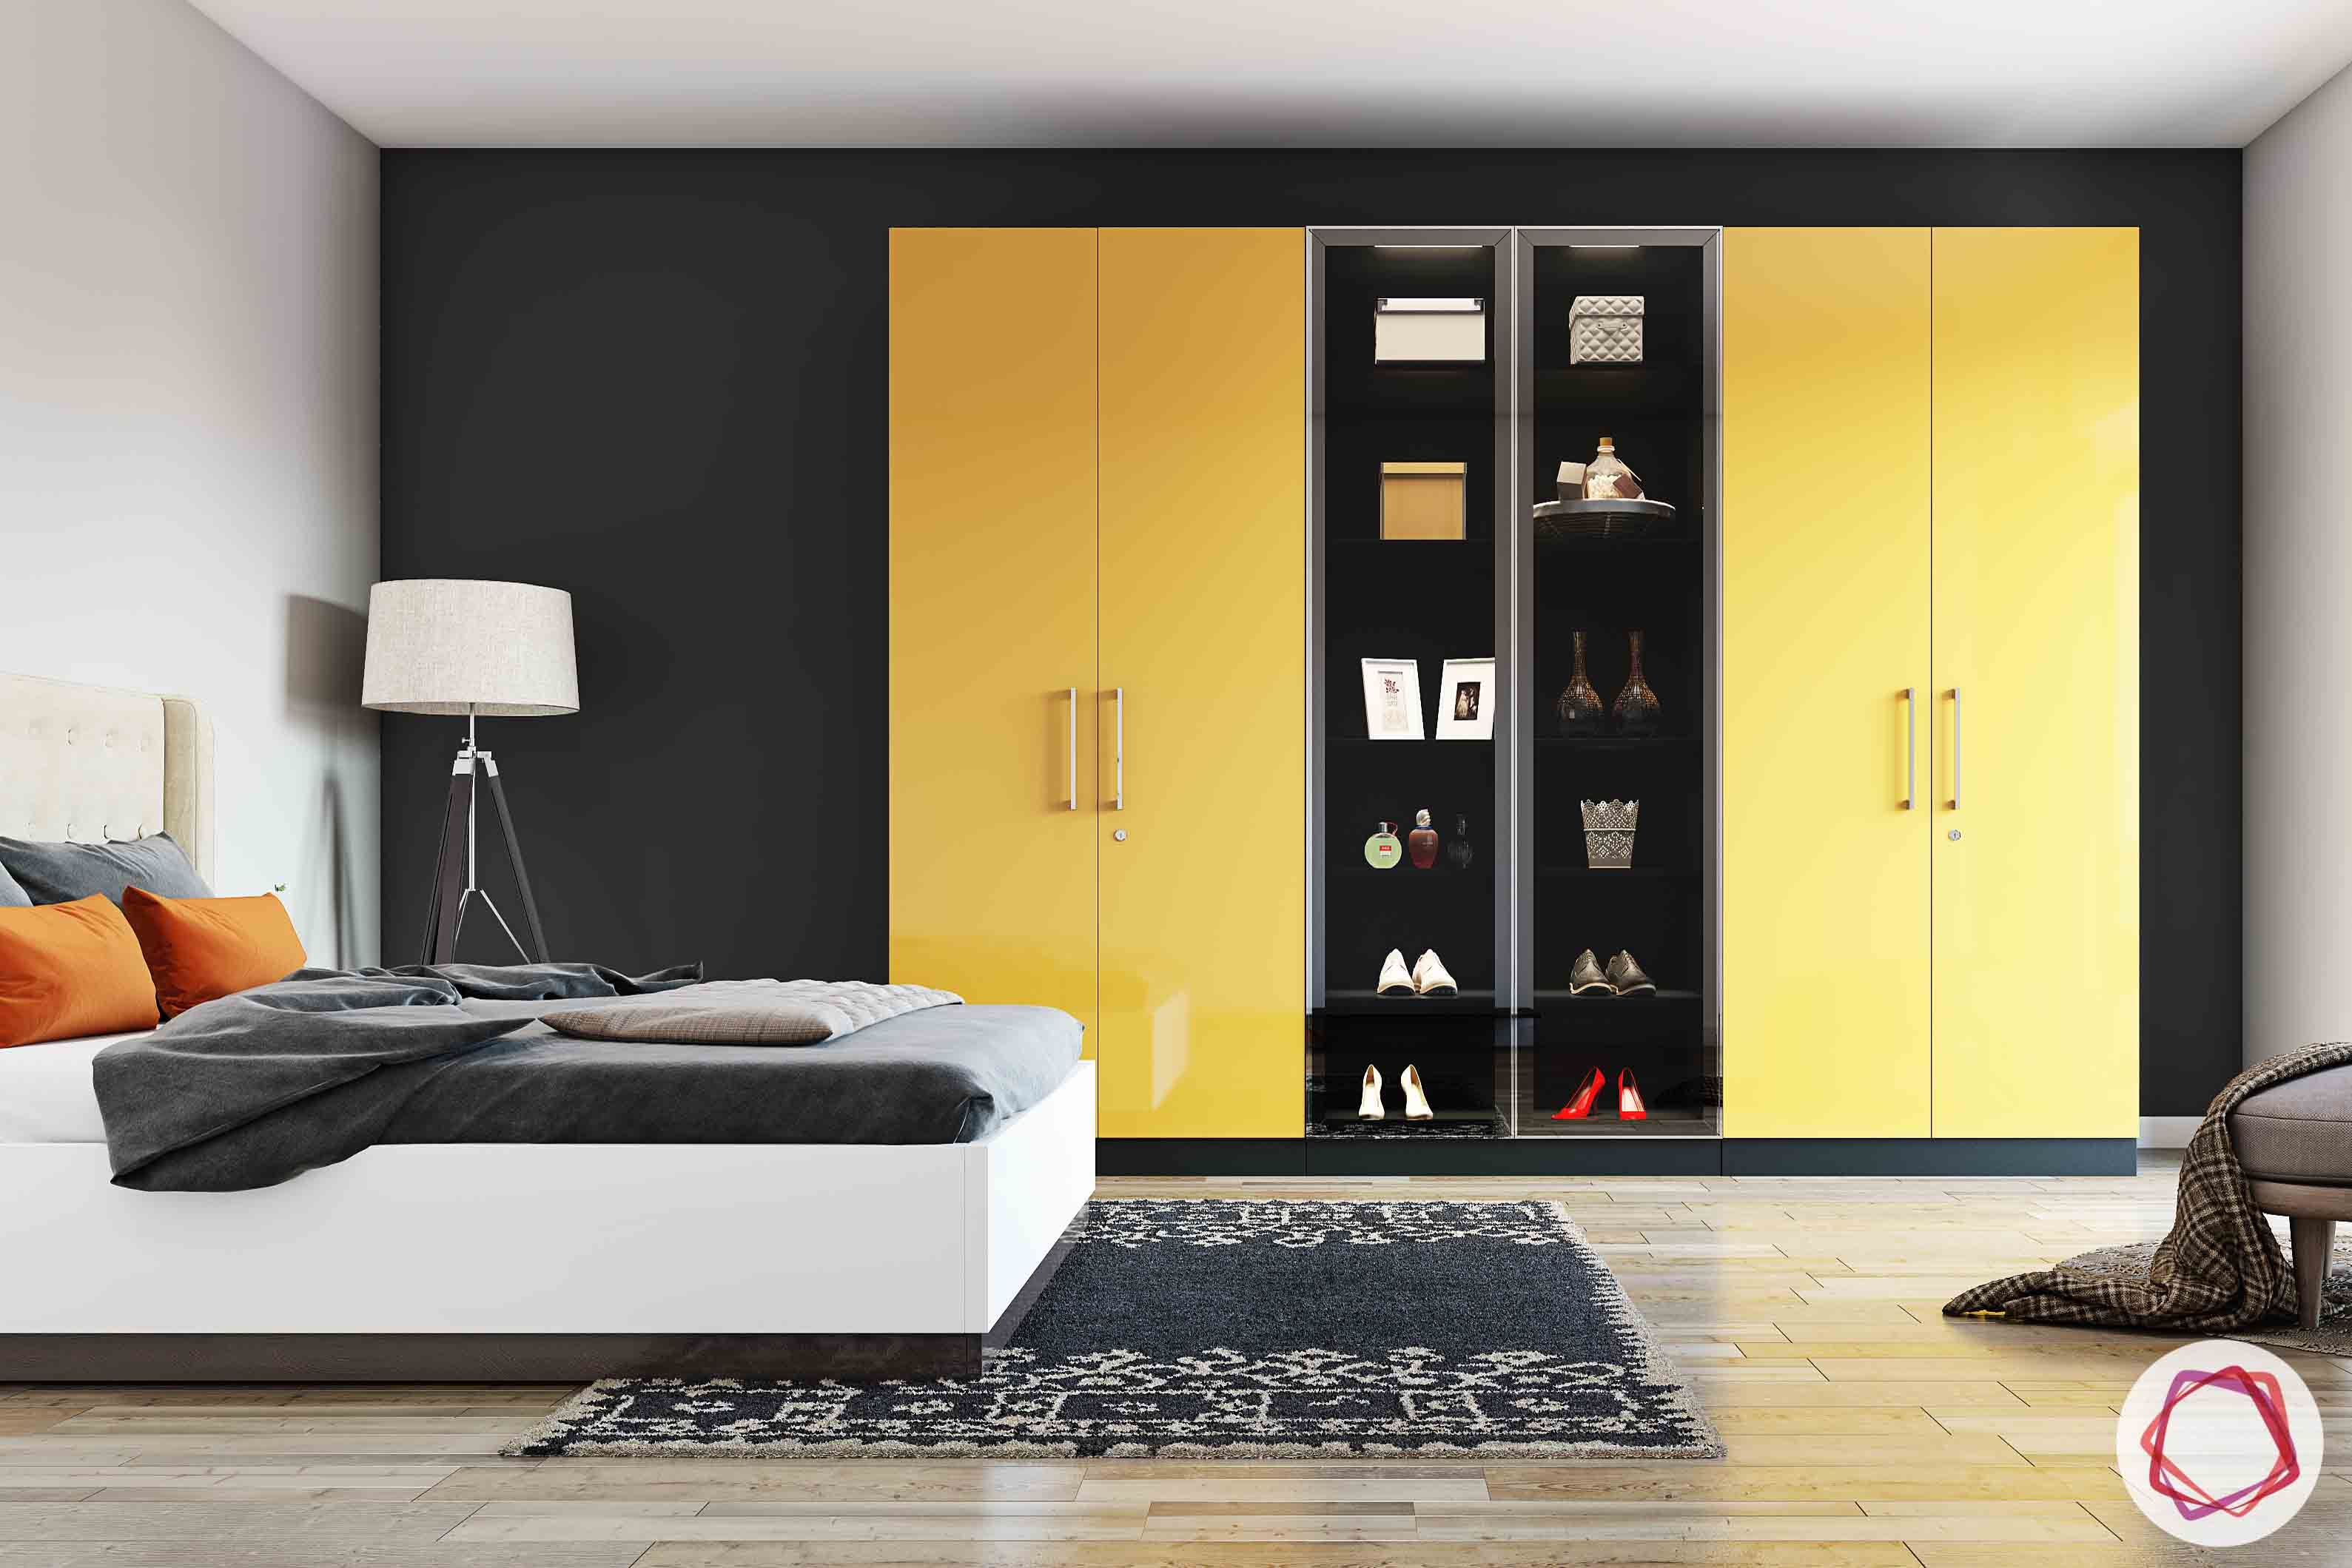 wardrobe-yellow-open-shelves-shoes-bed-lamp-rug